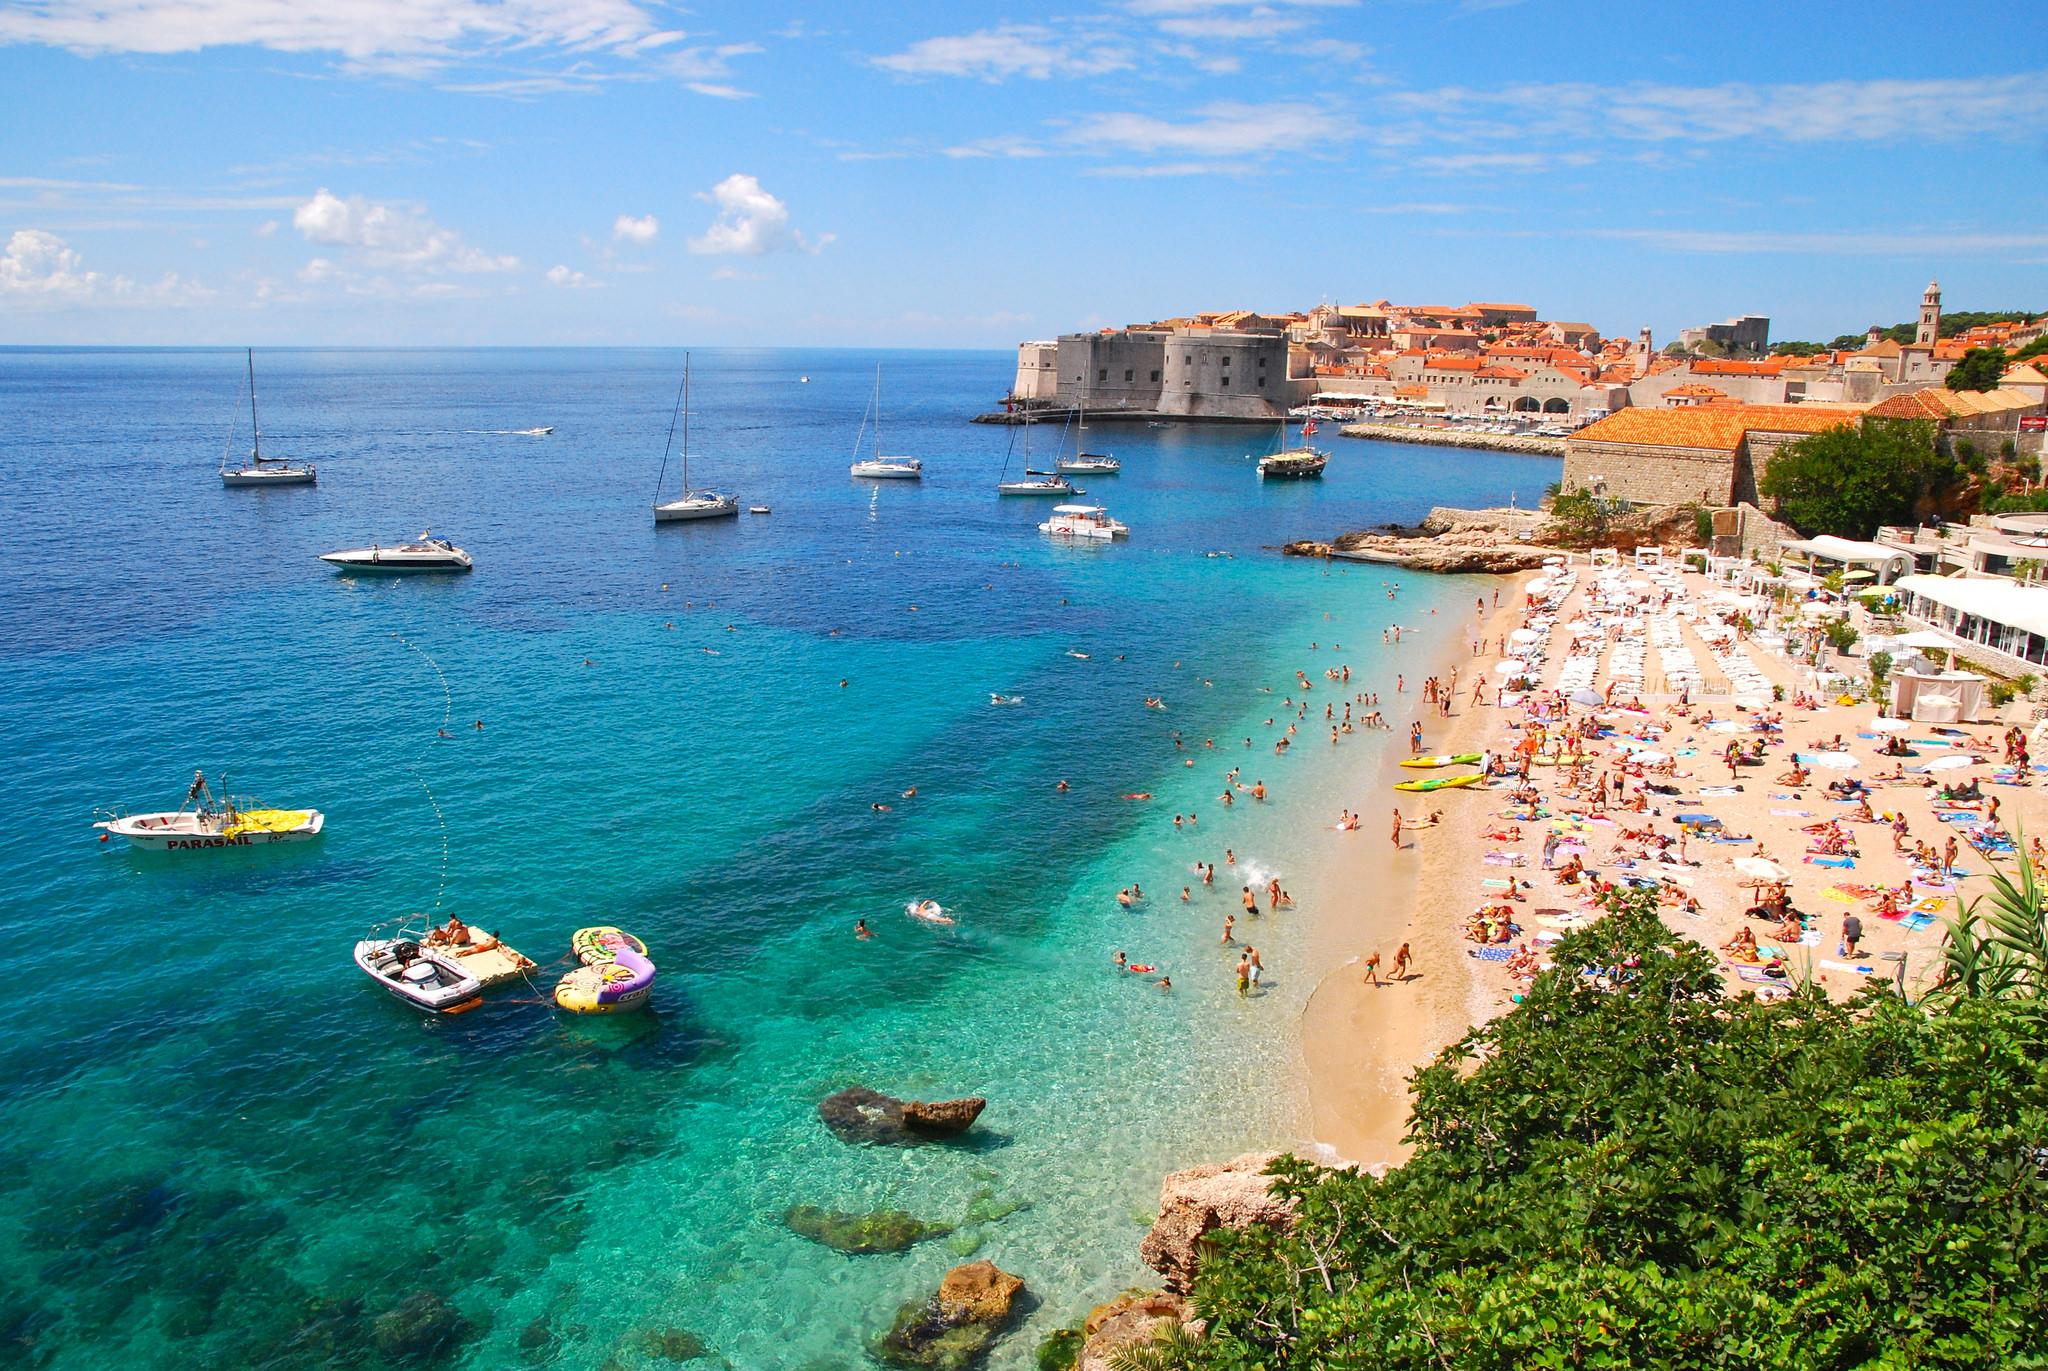 Dubrovnik Travel Guide. Attractions, beaches, food and hotels